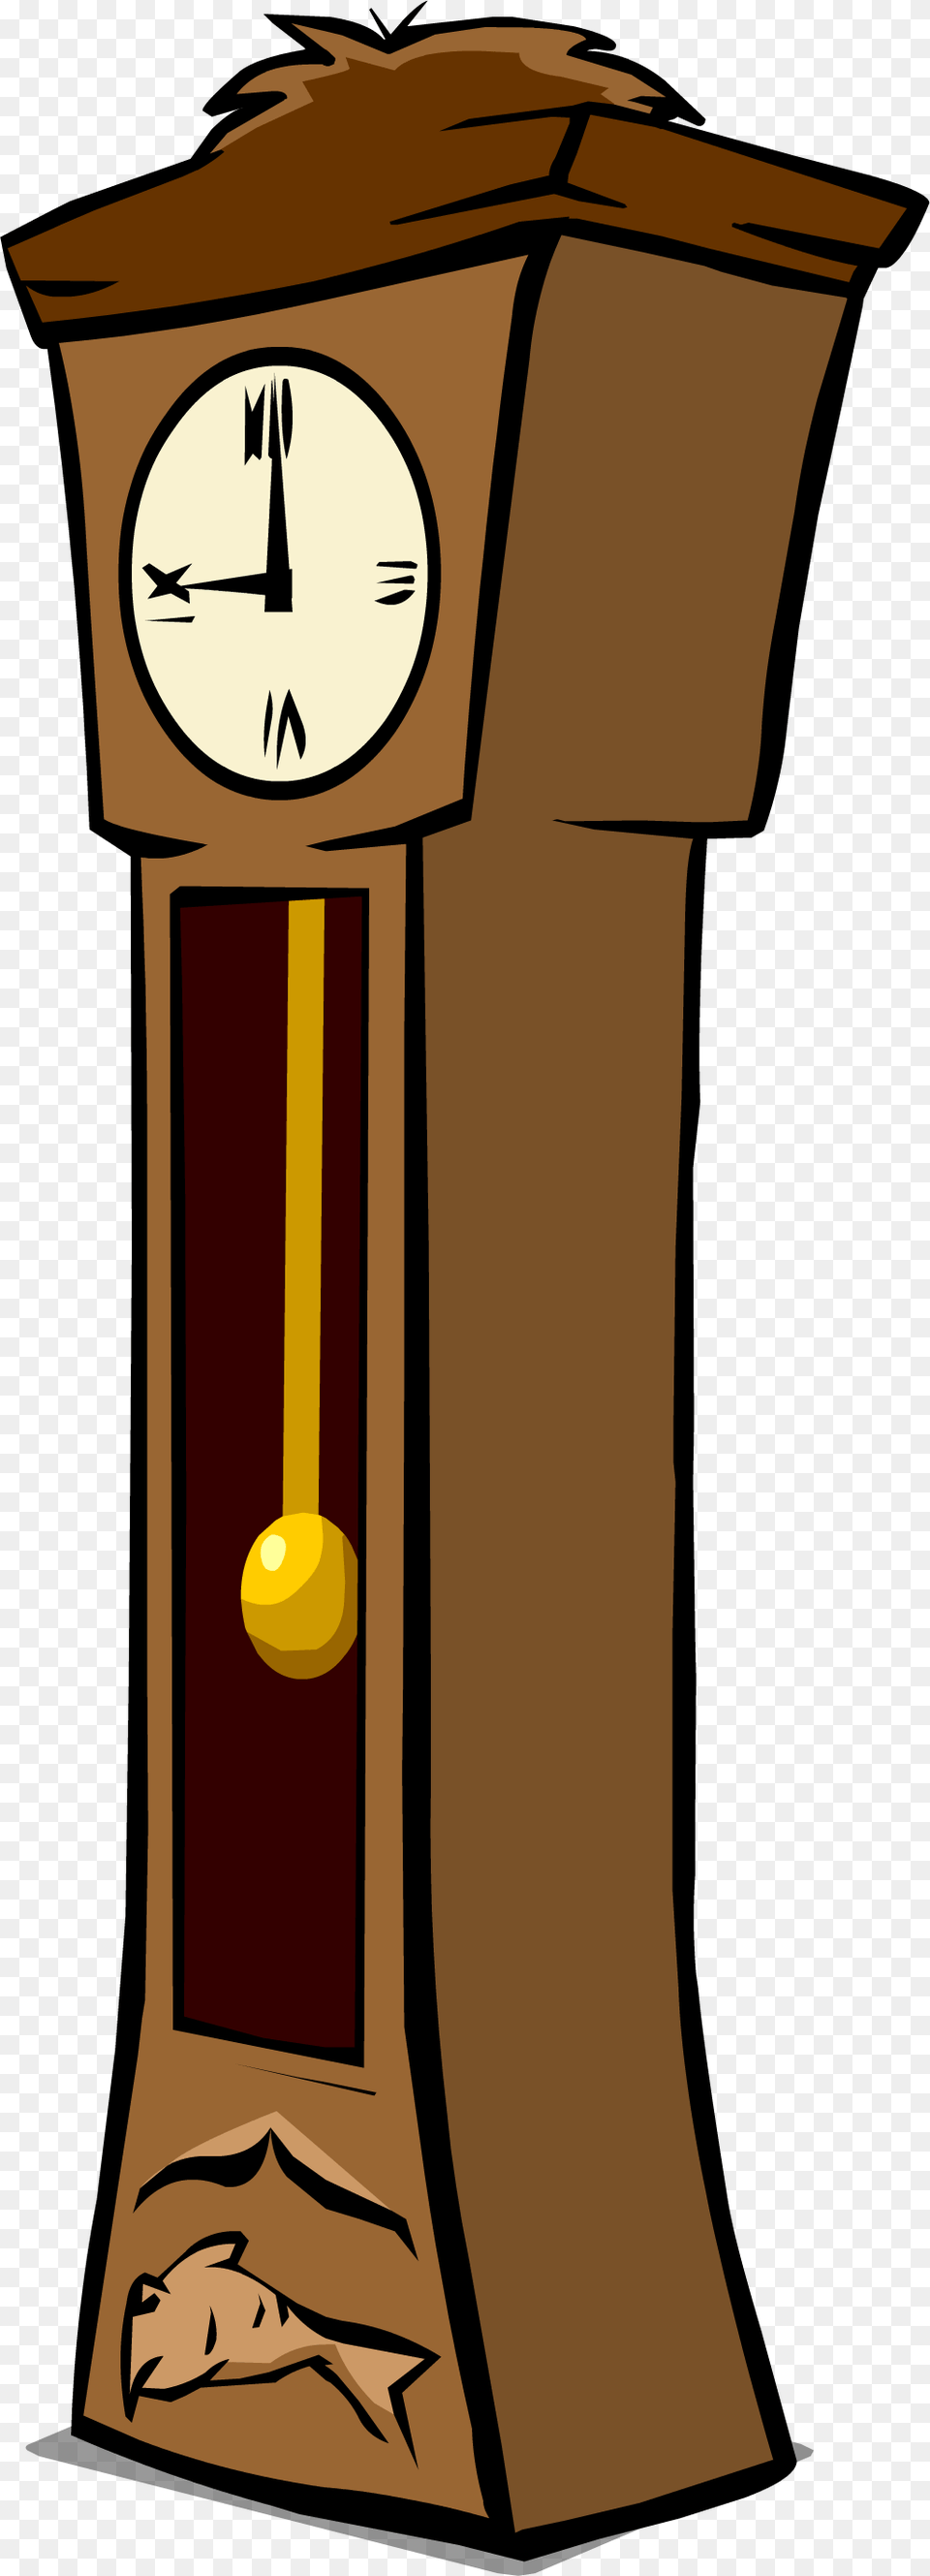 Grandfather Clock Clipart At Getdrawings Grandfather Clock Clipart, Analog Clock, Cross, Symbol, Ball Free Transparent Png